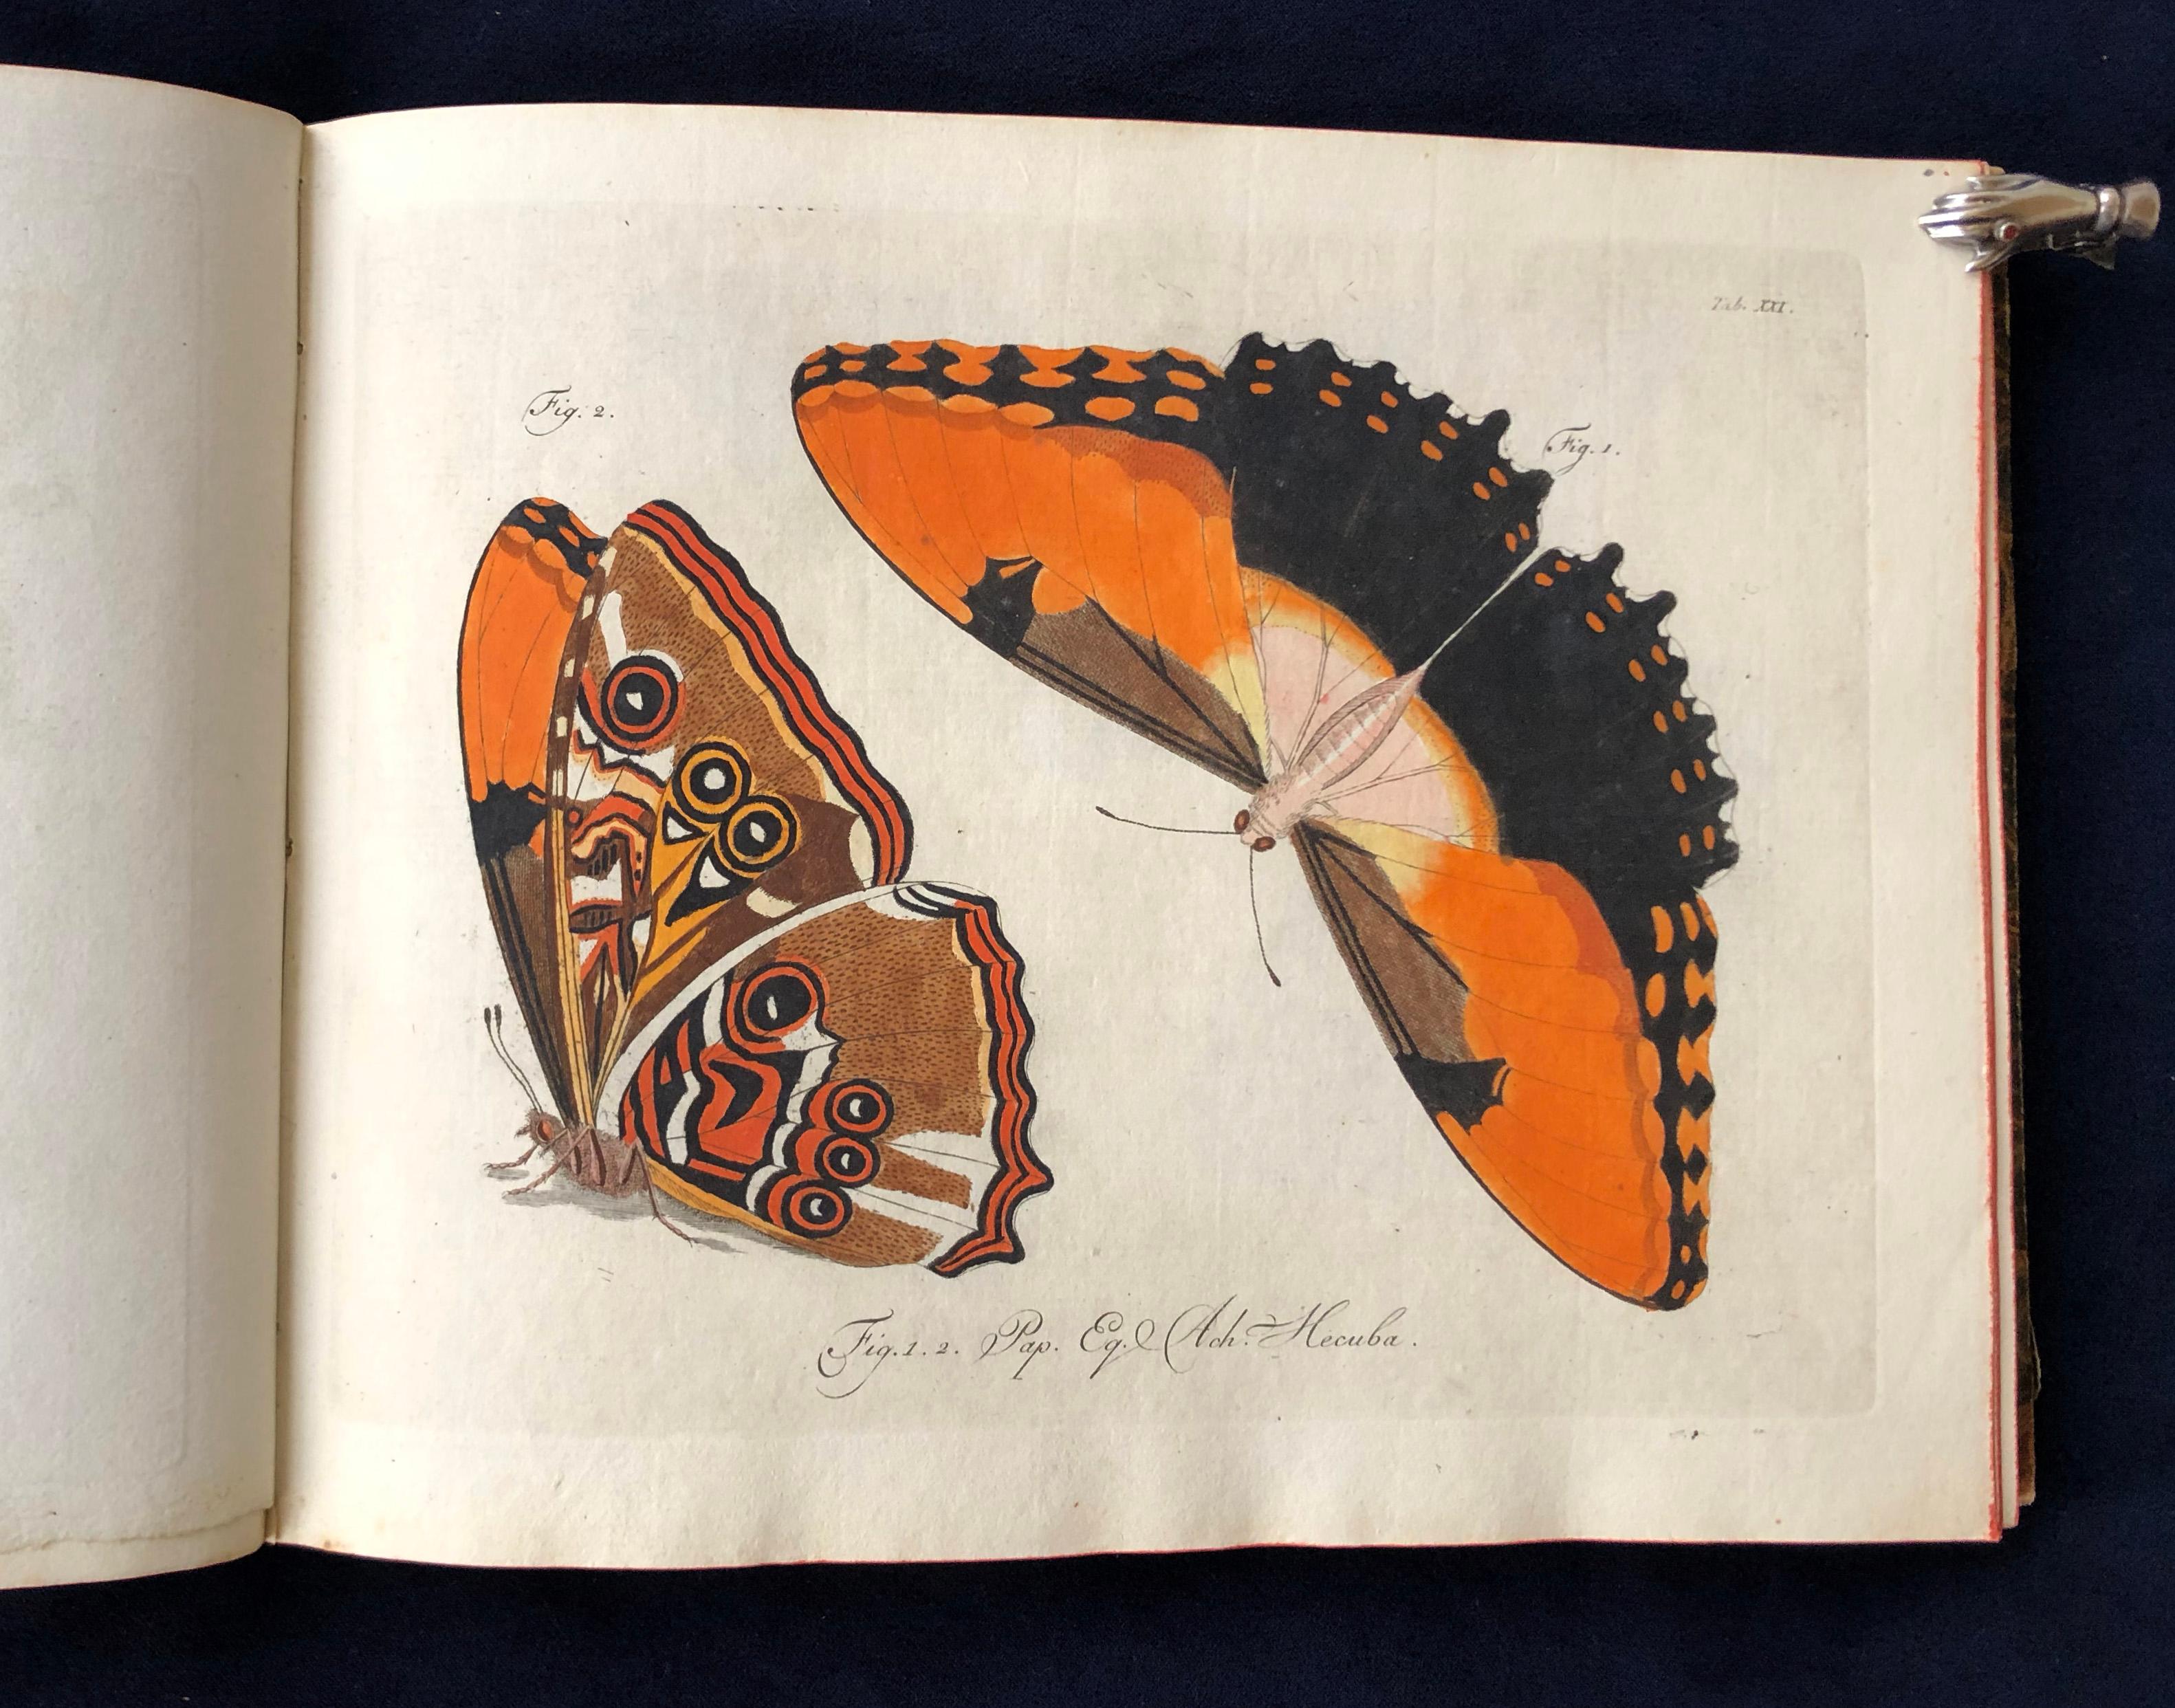 An exceedingly rare and beautifully-illustrated work by Carl Gustav Jablonsky and JFW Herbst, whose Natursystem is one of the first attempts at a complete survey of exotic and European butterflies, and edited following the system of Carl Linnaeus